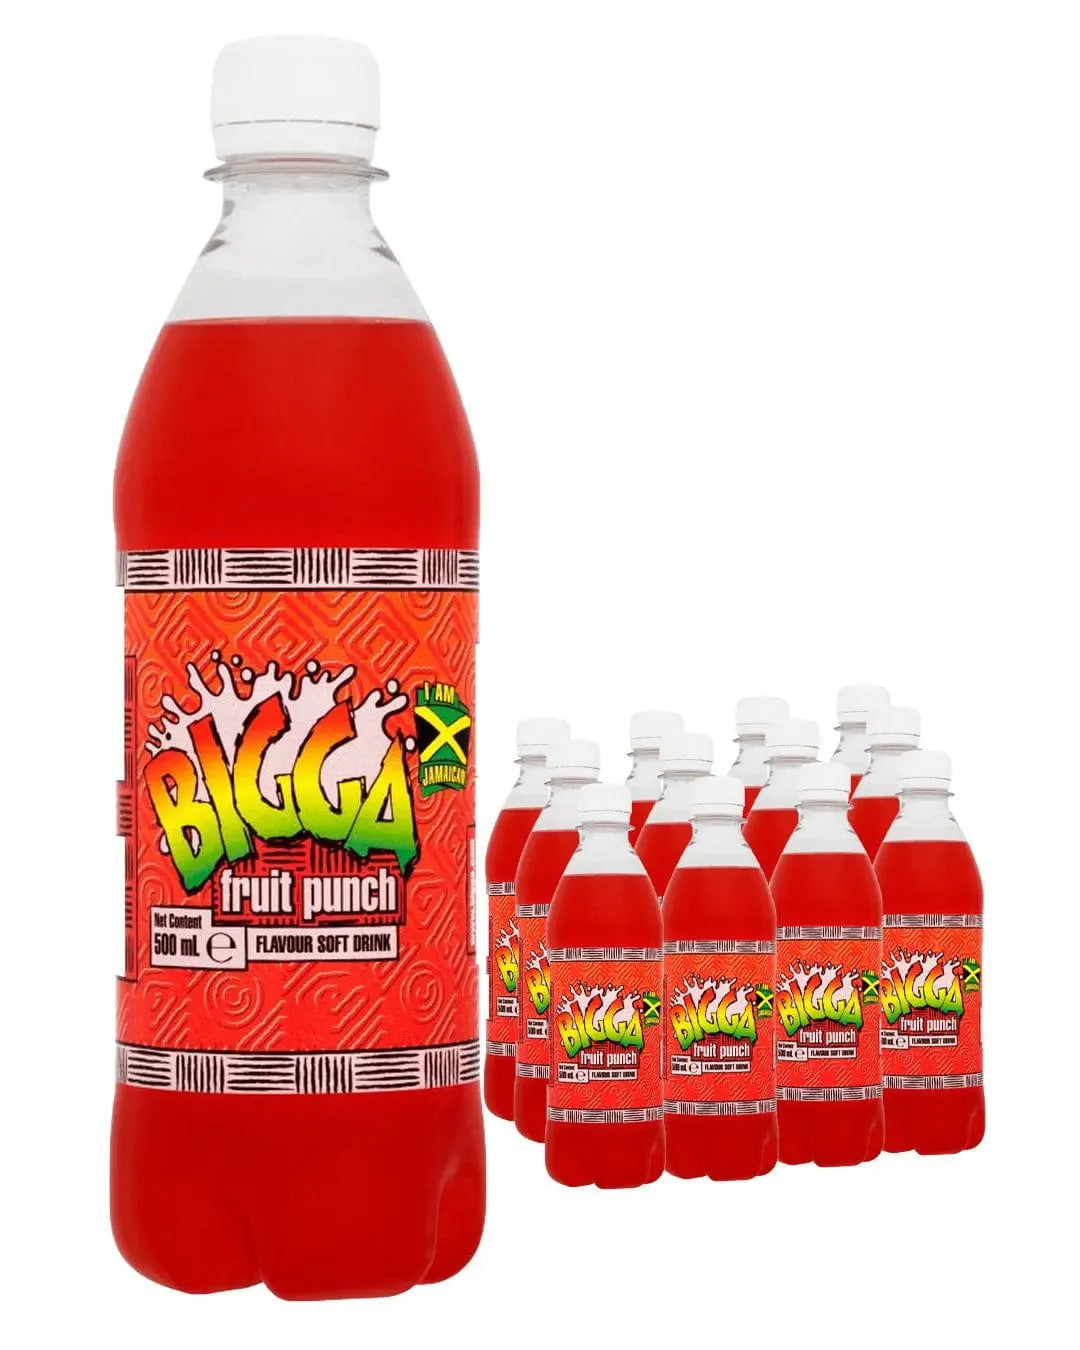 Bigga Fruit Punch Flavour Soft Drink Multipack, 24 x 330 ml Soft Drinks & Mixers